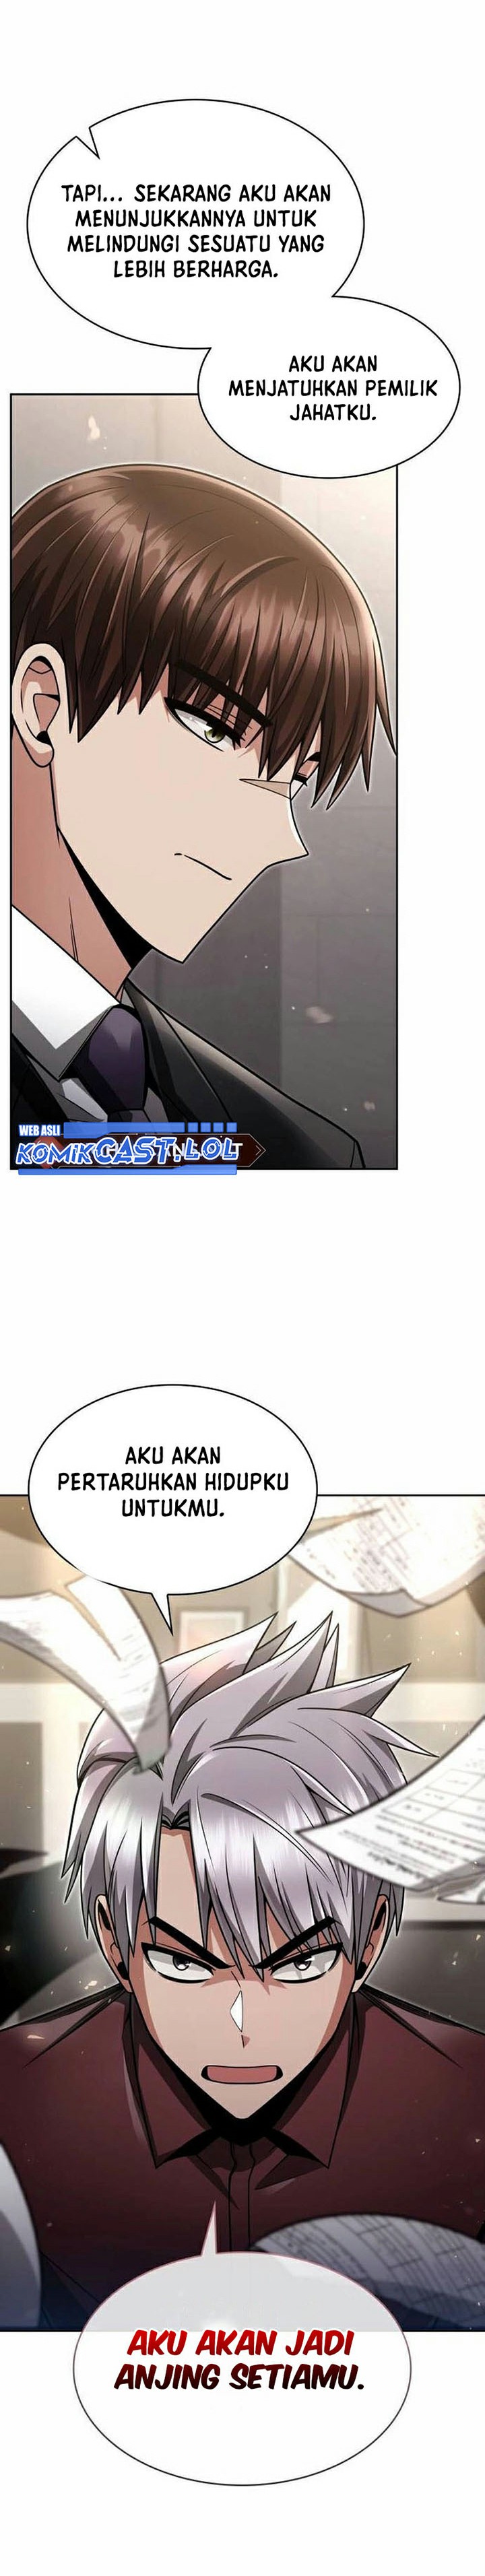 Dilarang COPAS - situs resmi www.mangacanblog.com - Komik clever cleaning life of the returned genius hunter 062 - chapter 62 63 Indonesia clever cleaning life of the returned genius hunter 062 - chapter 62 Terbaru 38|Baca Manga Komik Indonesia|Mangacan